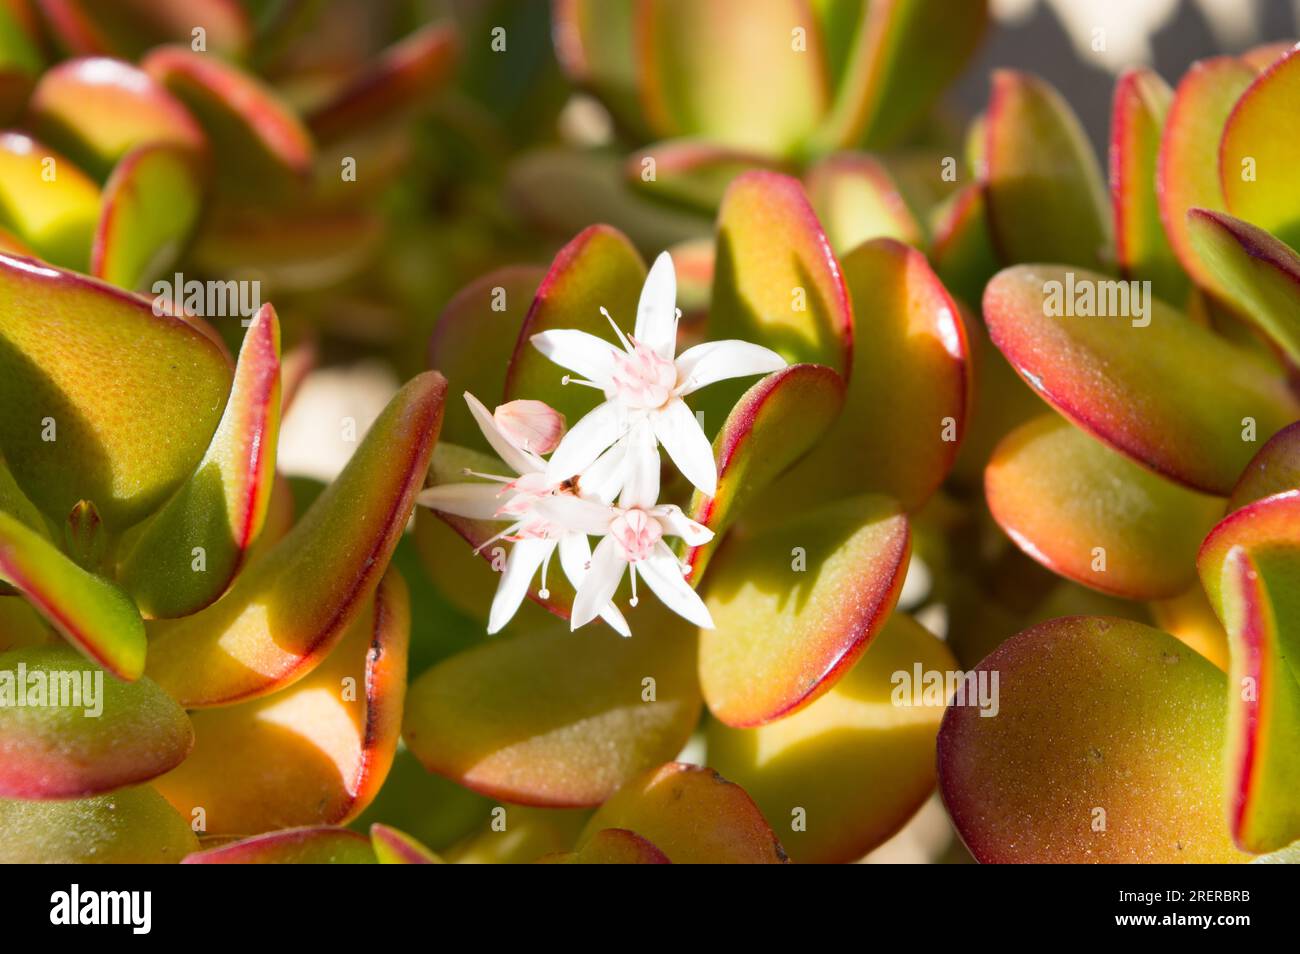 Crassula ovata plant, jade or money plant, with small white flowers and jade green leaves with red border, close up Stock Photo